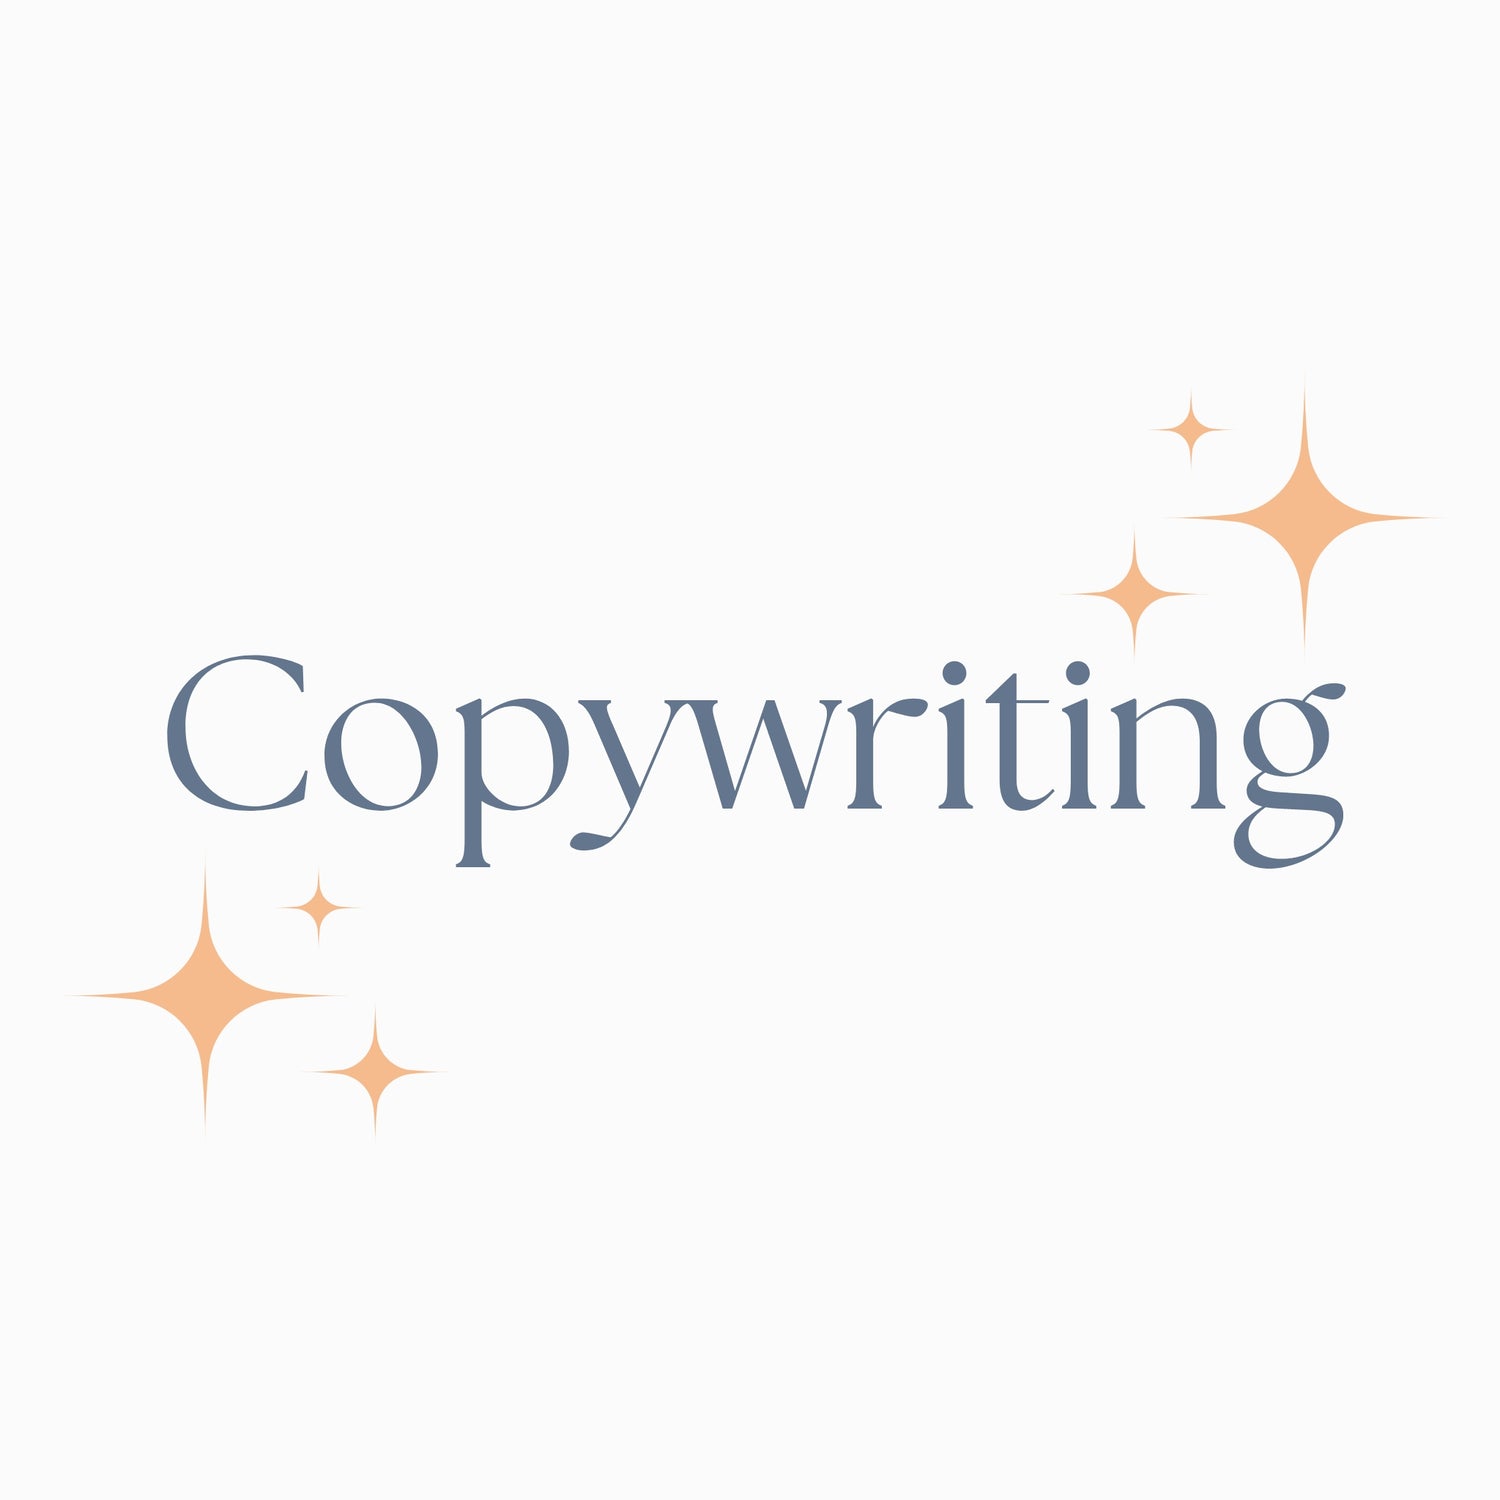 copywriting - product descriptions, SEO, tags, collections